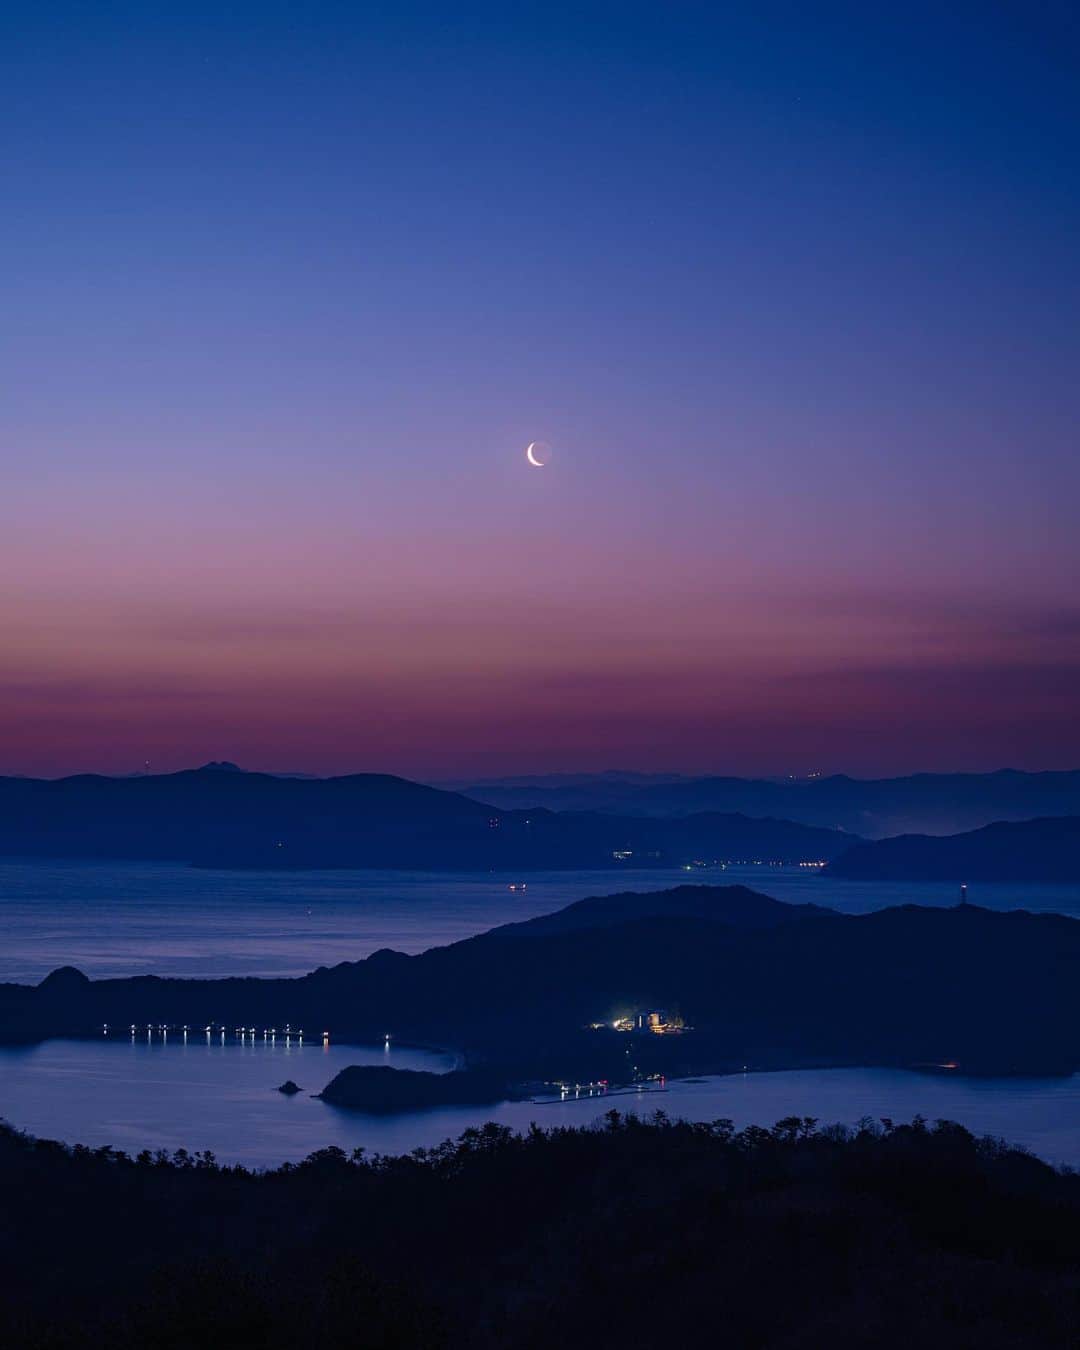 Ryoyaのインスタグラム：「I went to see and take photos of Milkyway last night but I liked this photo with arising moon in the early morning the most after all :) #amanohashidate #moon #kyoto  Camera #GFX100 Lens #planar80mm  ISO400 // f5.6 // ss 2”  昨日は天の川を撮りに天橋立に行ったのですが、結局この月の写真が１番のお気に入りになりました^_^ 去年も３月に同じ場所に来ましたが、天橋立は天の川を撮るにはやはりちょっと光害が多いですね。」